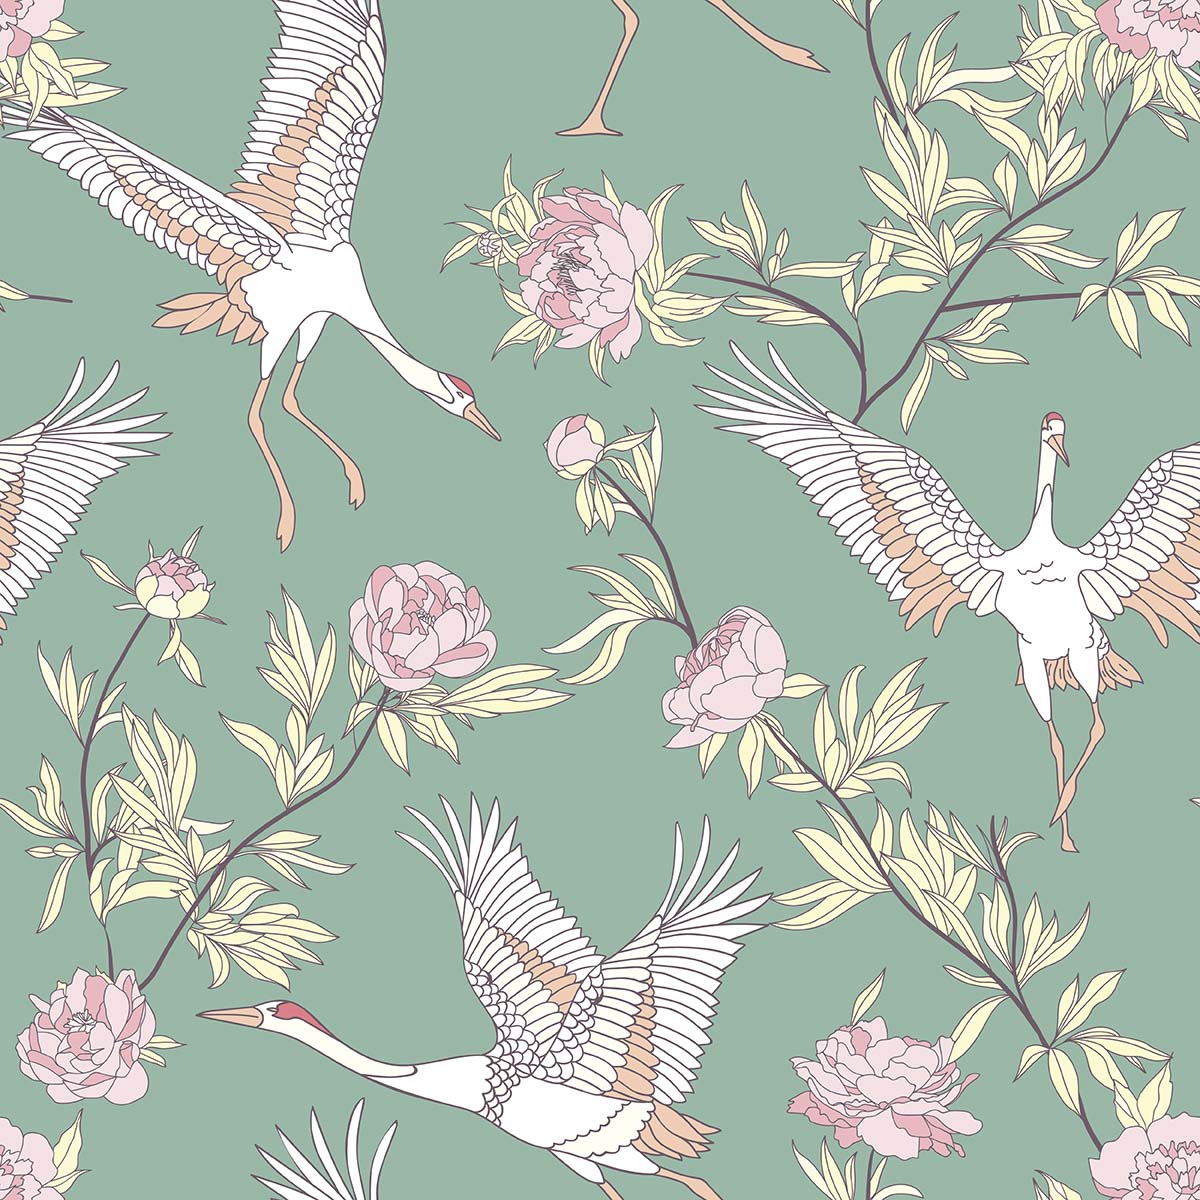 A pattern of birds and flowers